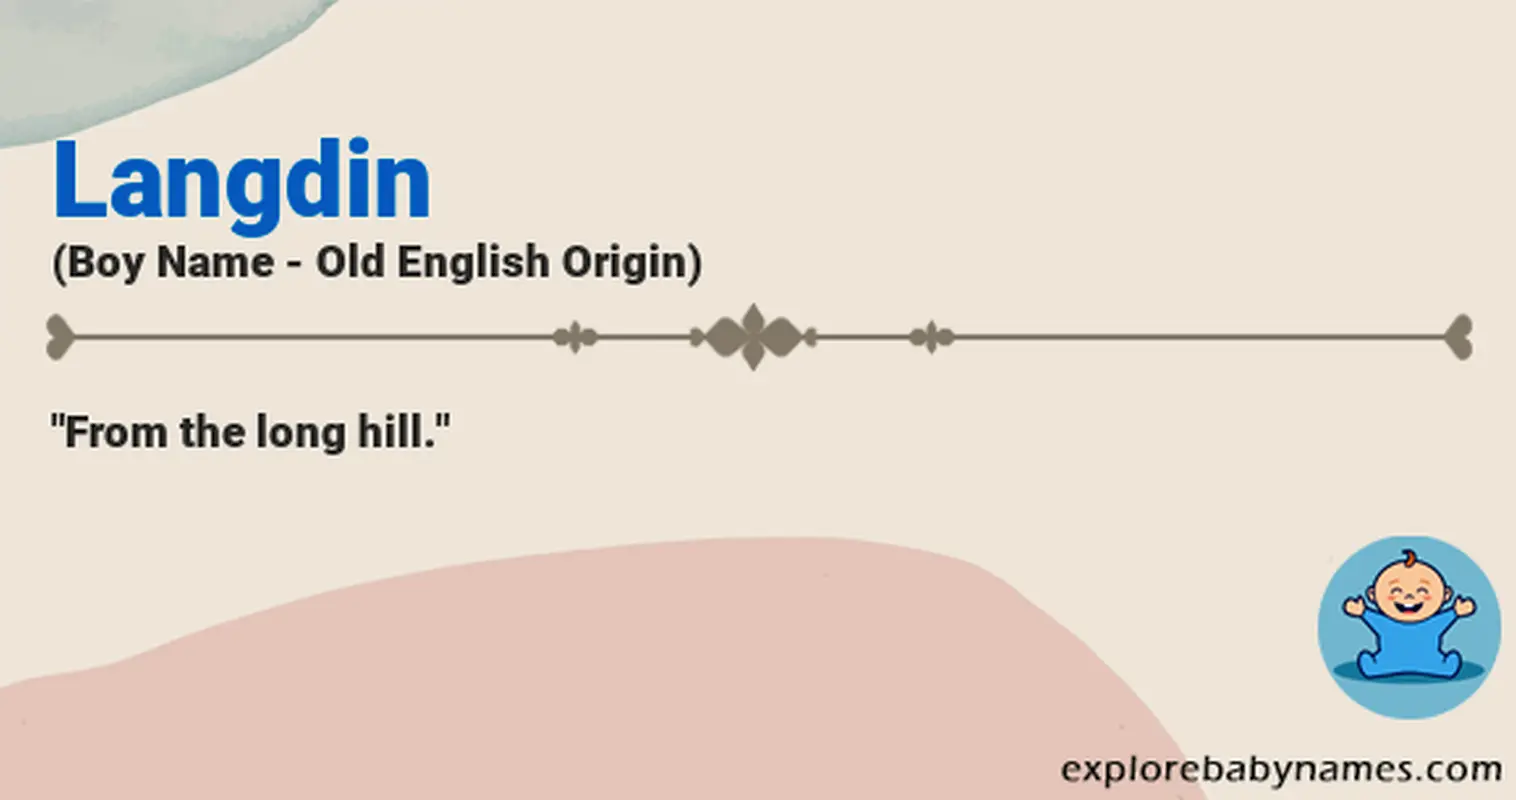 Meaning of Langdin